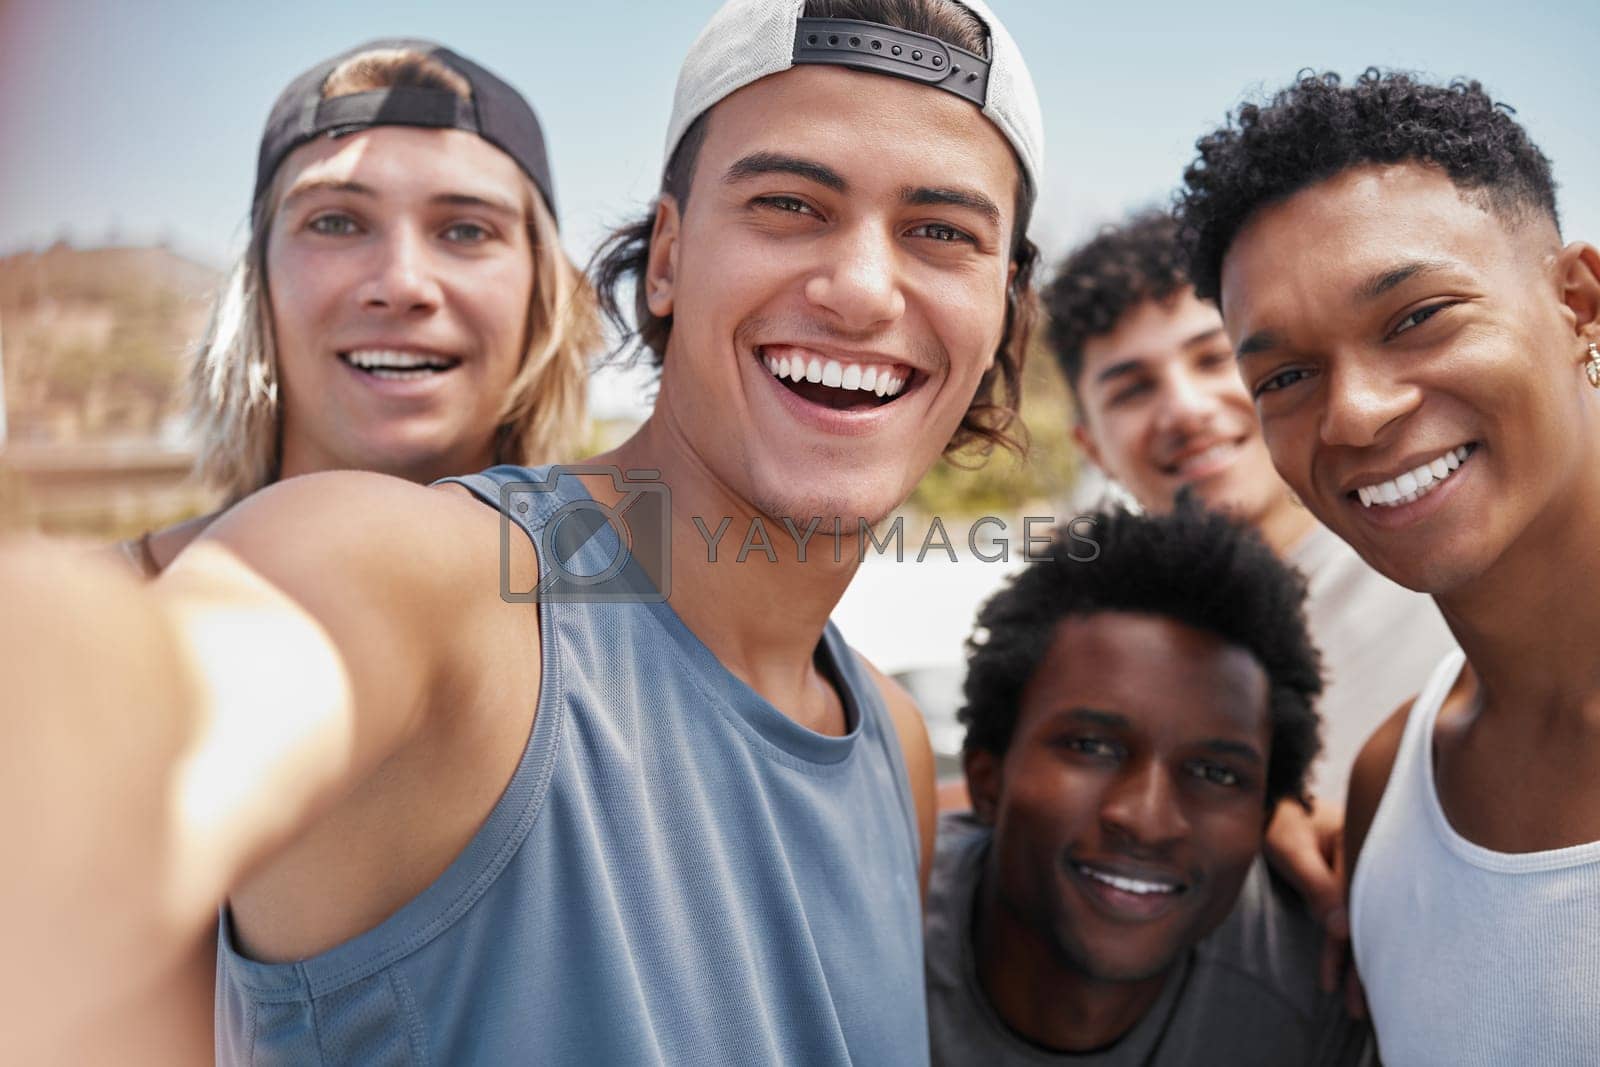 Royalty free image of Summer, students and happy selfie with friends together on outdoor holiday break adventure. Gen Z, smile and happiness in interracial friendship with men enjoying vacation in Los Angeles. by YuriArcurs